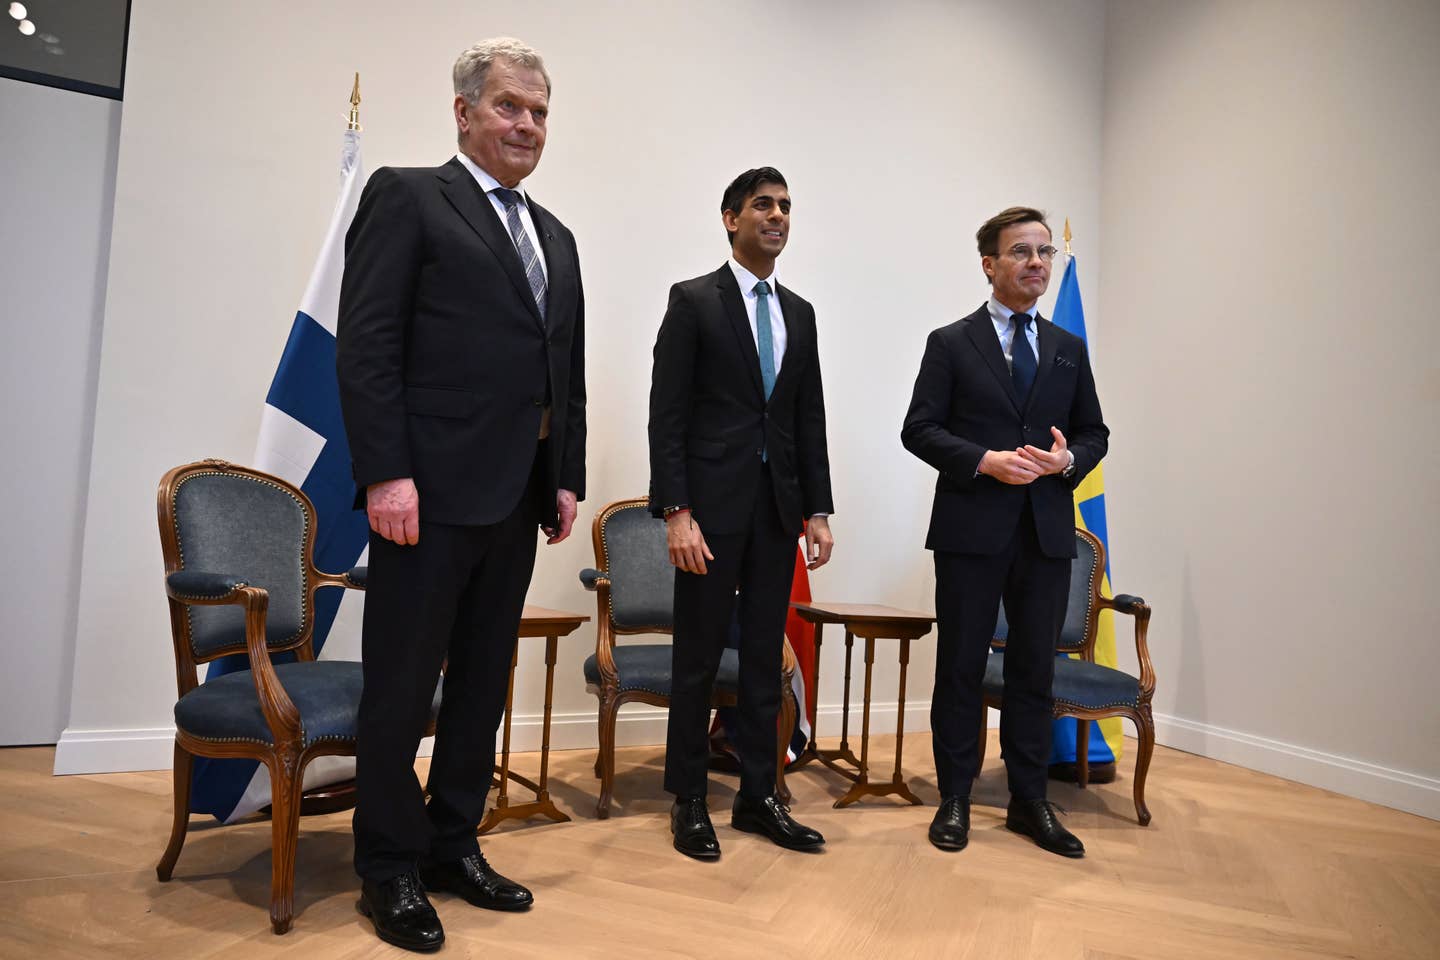 Finnish President Sauli Niinisto, British Prime Minister Rishi Sunak, and Swedish Prime Minister Ulf Kristersson during their trilateral meeting on the sidelines of the Munich Security Conference in Munich, Germany, on February 18, 2023. <em>Photo by Ben Stansall — Pool/Getty Images</em>